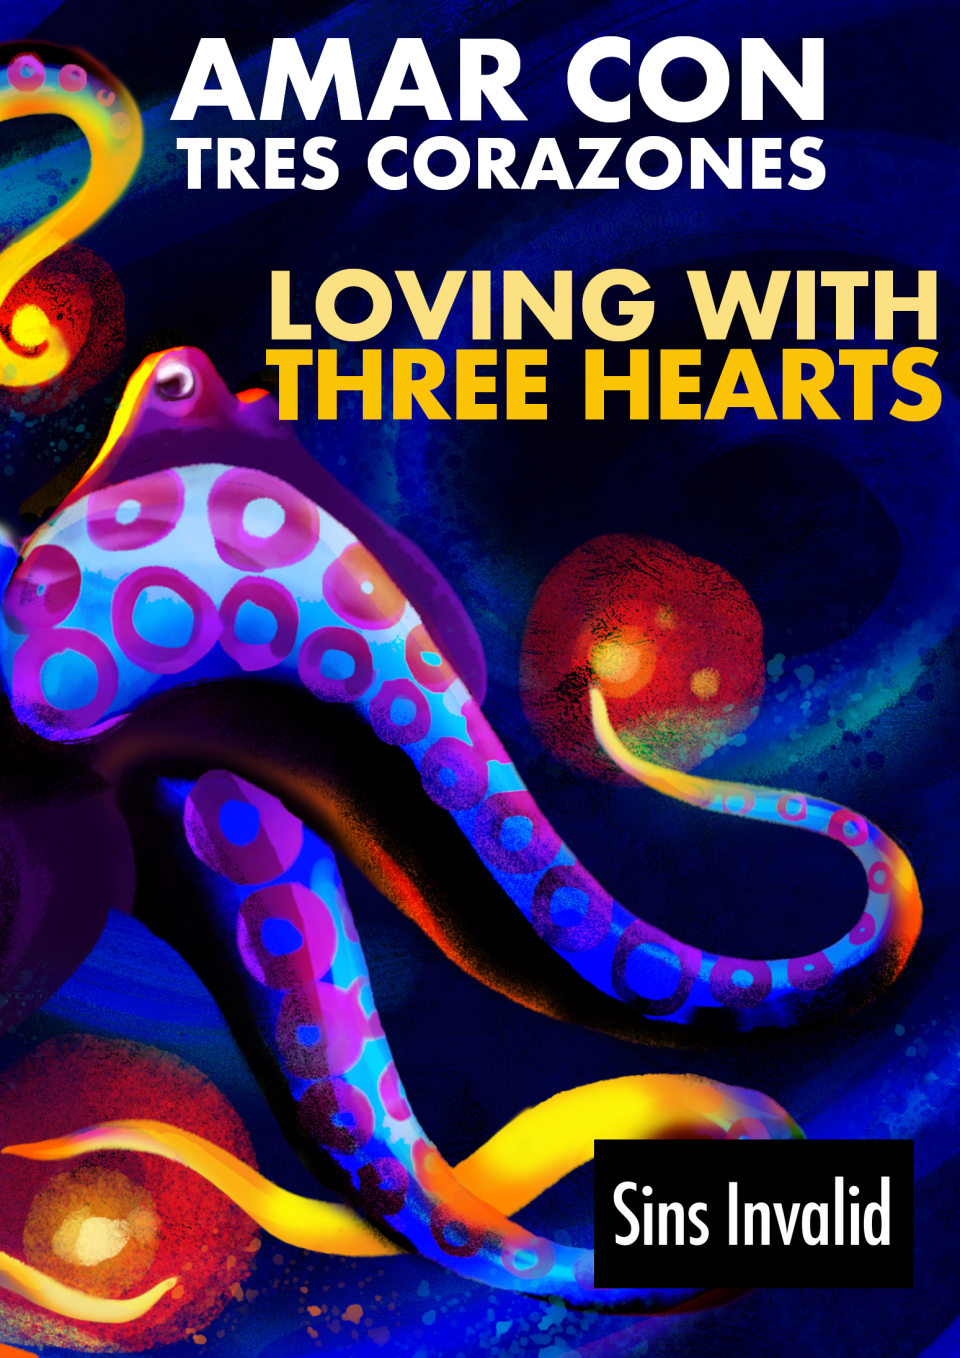 Loving With Three Hearts / Amar Con Tres Corazones poster: A colorful display of painted octopus tenticals cascade across the page, the title of the film floats above the image